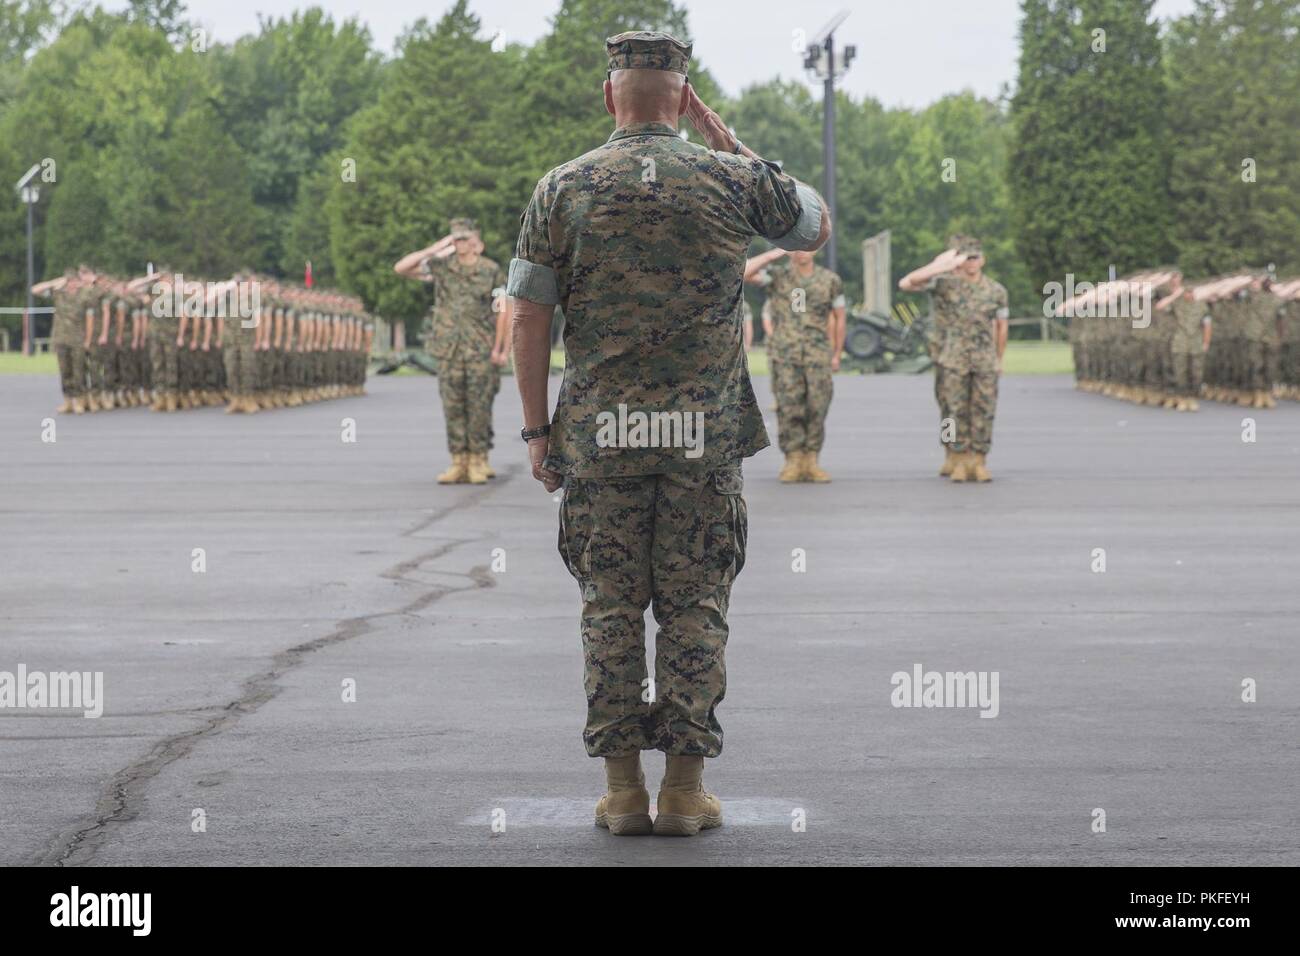 U.S. Marine Corps Gen. Robert B. Neller, commandant of the Marine Corps, salutes during an Officer Candidates School graduation and commissioning ceremony on Marine Corps Base Quantico, Va., Aug. 11, 2018. The candidates must go through three months of intensive training to evaluate and screen individuals for the leadership, moral, mental, and physical qualities required for commissioning as a U.S. Marine Corps officer. Stock Photo